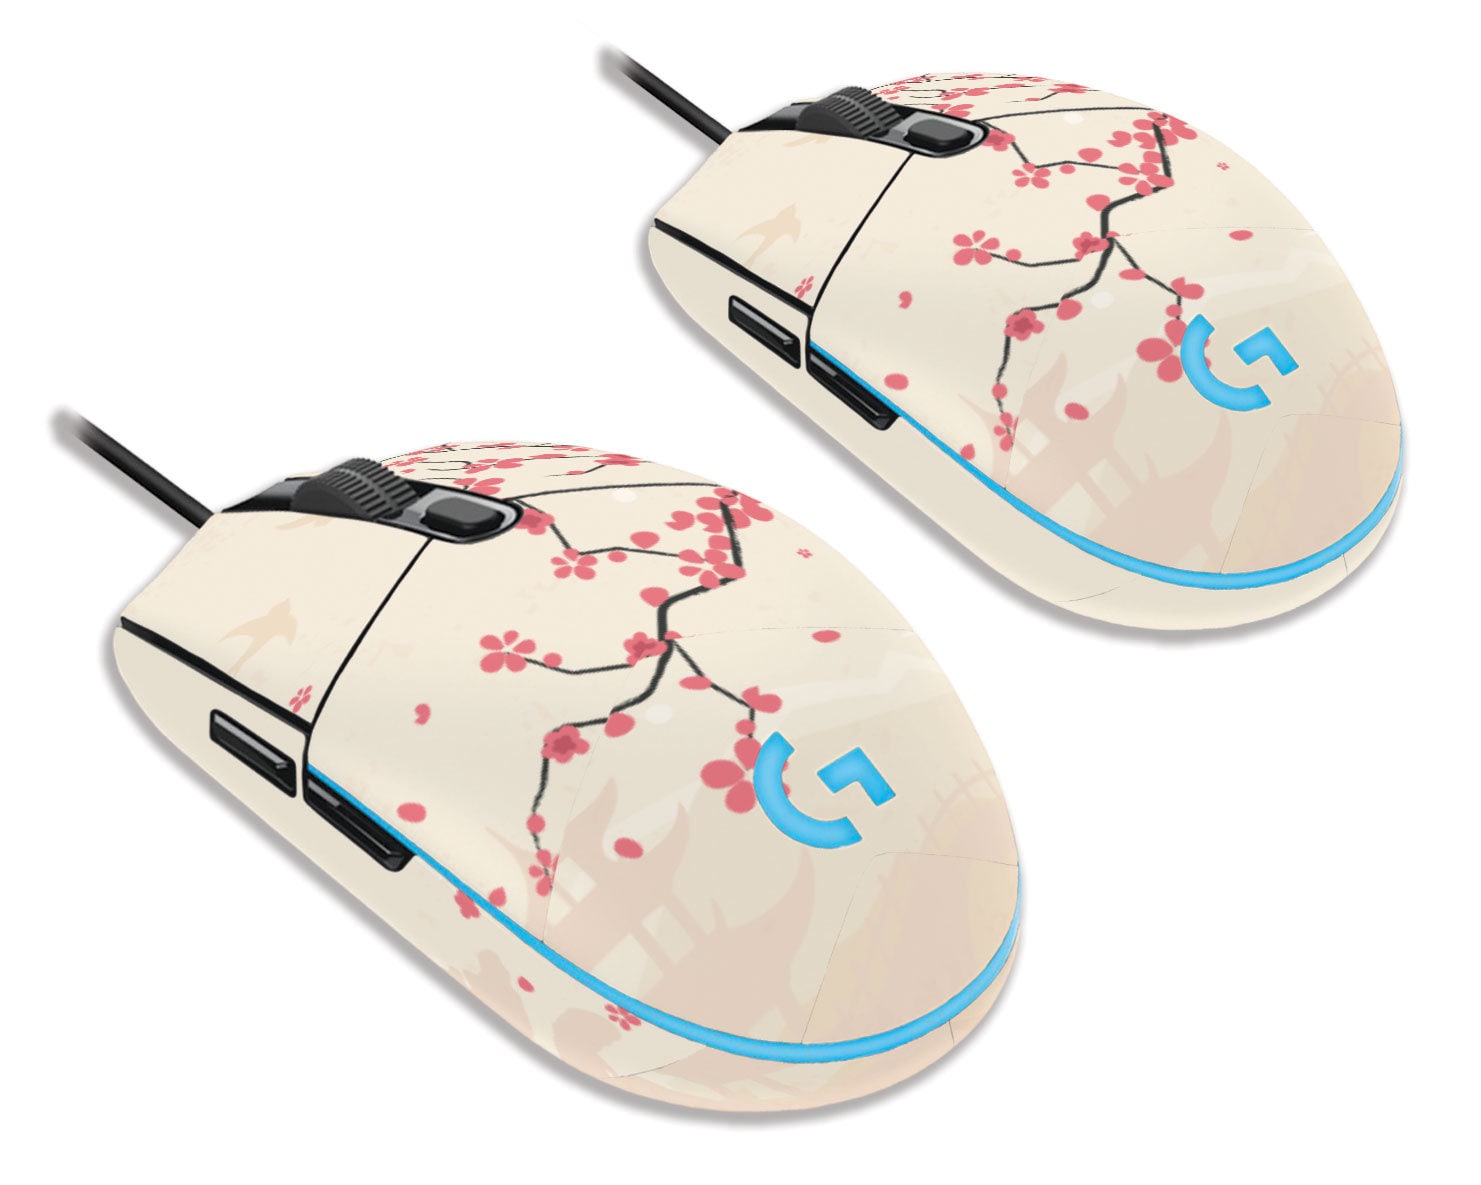 White Marble Skin for the Logitech G203 Prodigy Gaming Mouse Both Original  and Solid Side Options as Shown Are Included -  Israel